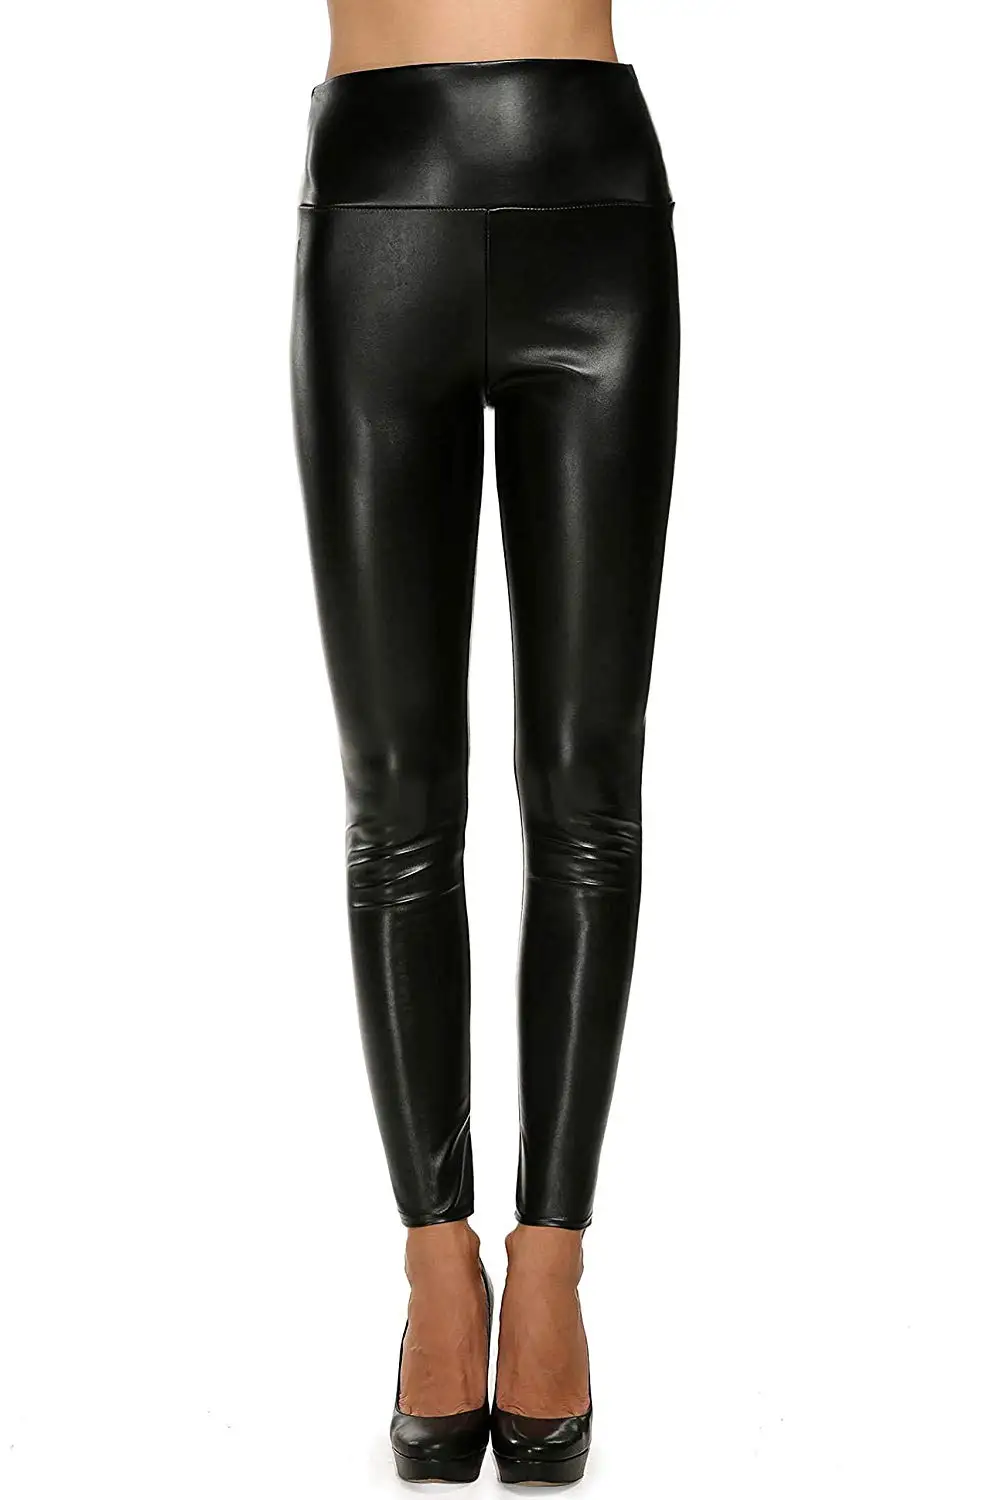 Cheap Cheap Shiny Leggings Find Cheap Shiny Leggings Deals On Line At